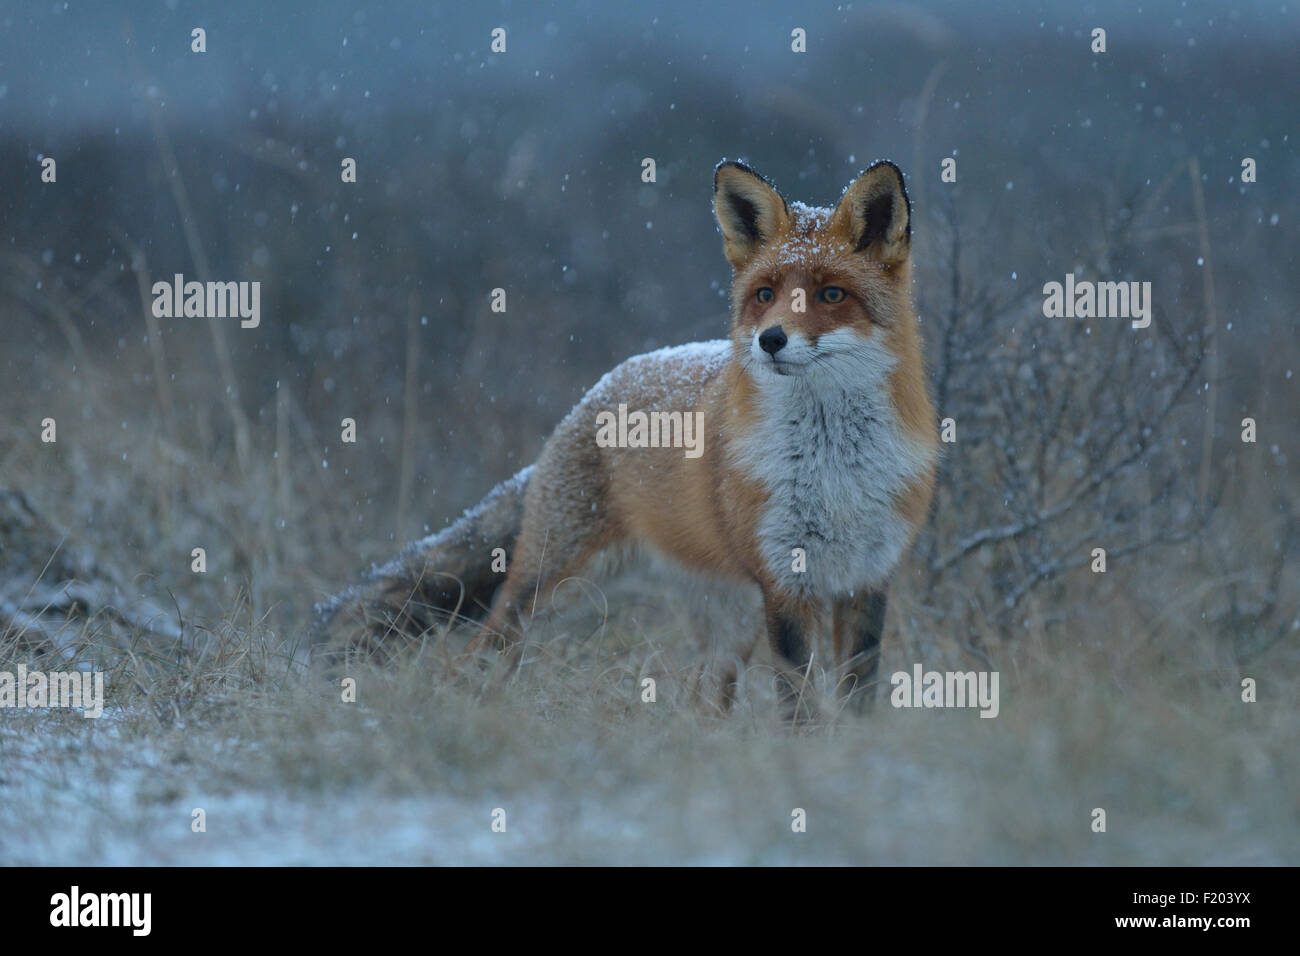 Snowflakes trickle on a Red Fox / Rotfuchs / Vulpes vulpes / Fuchs / Fox while the night comes in. Stock Photo